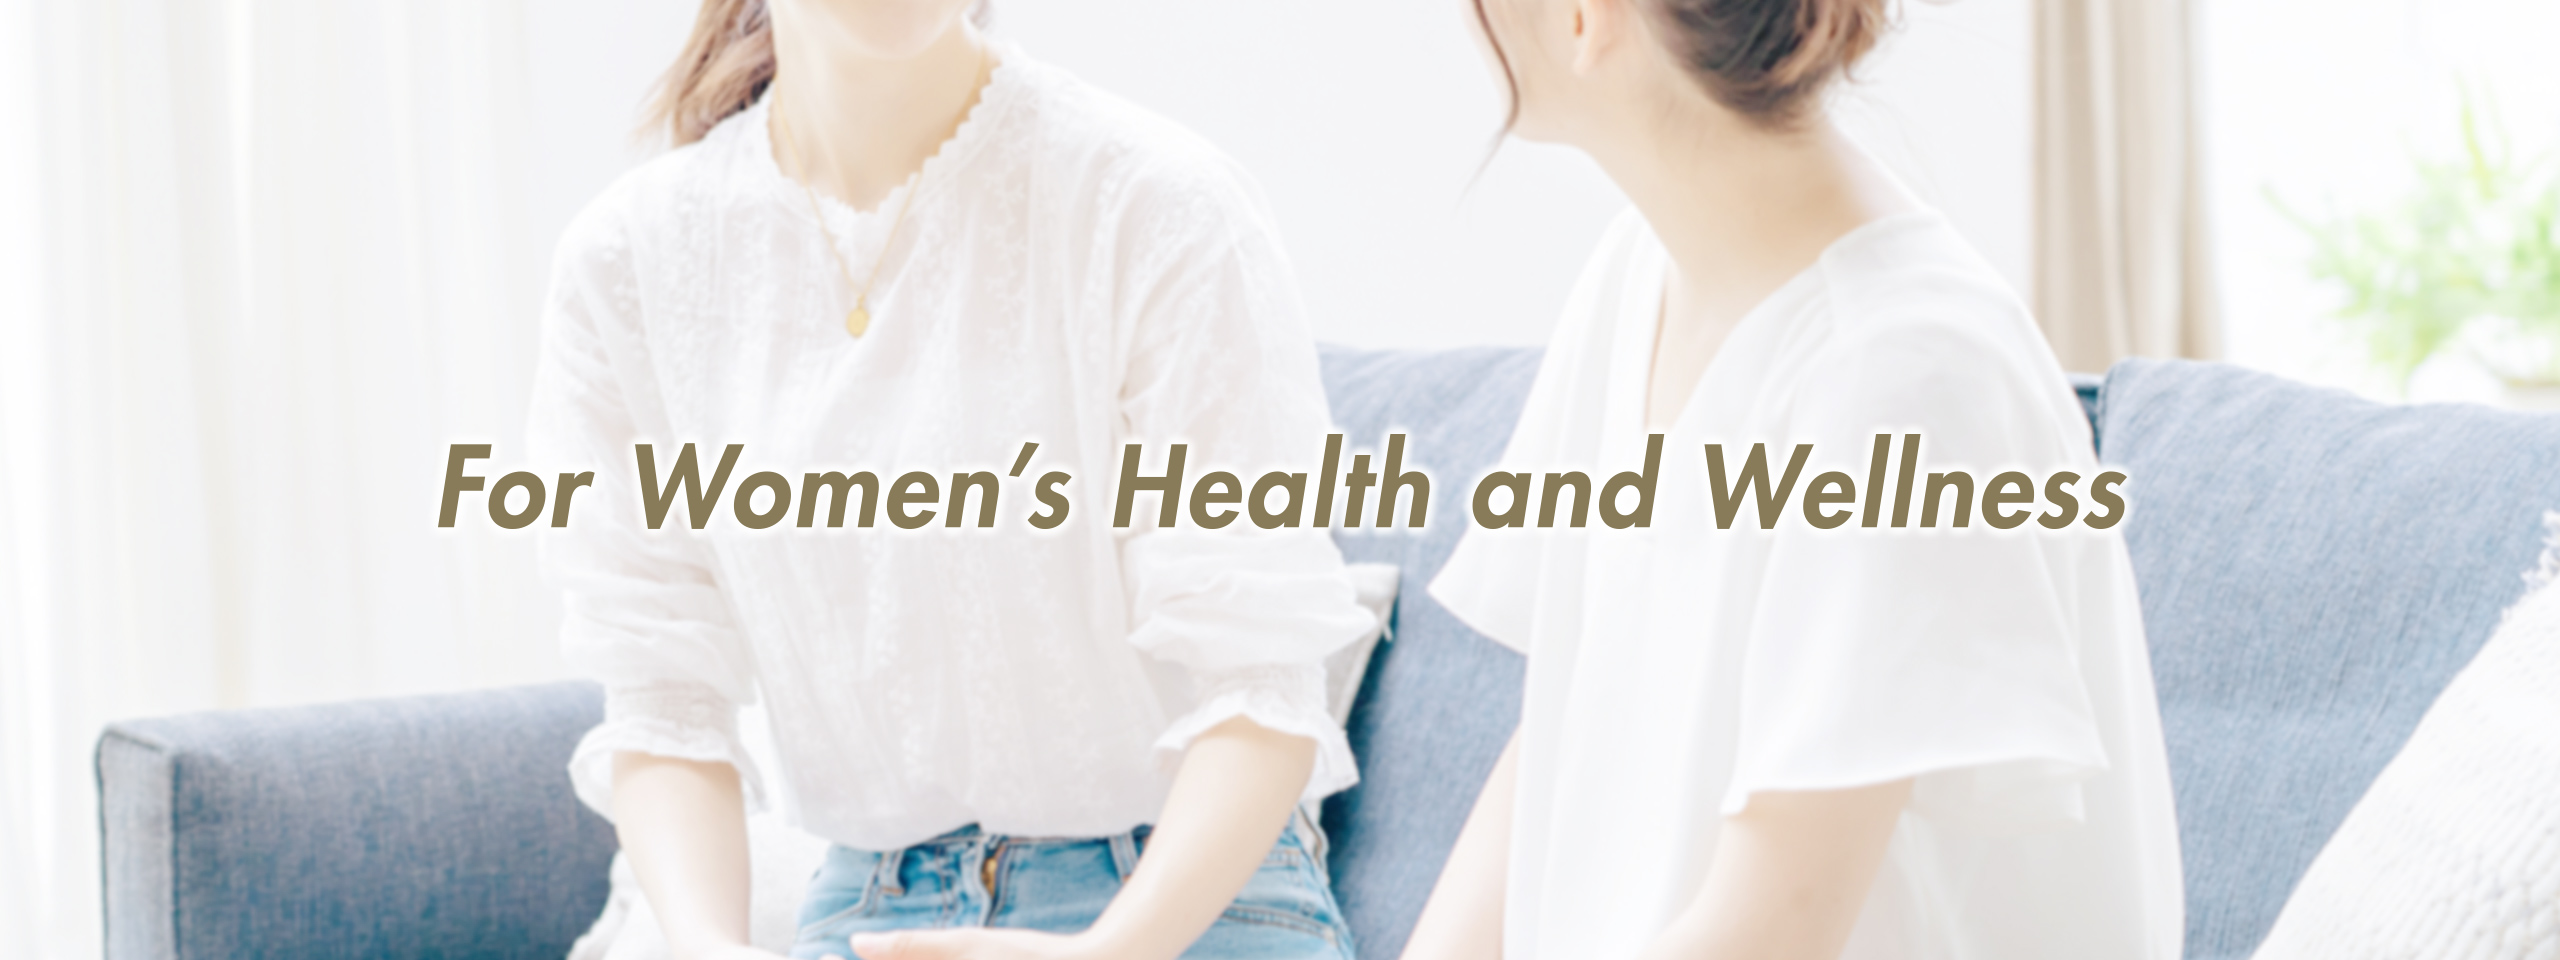 For Women's Health and Wellness